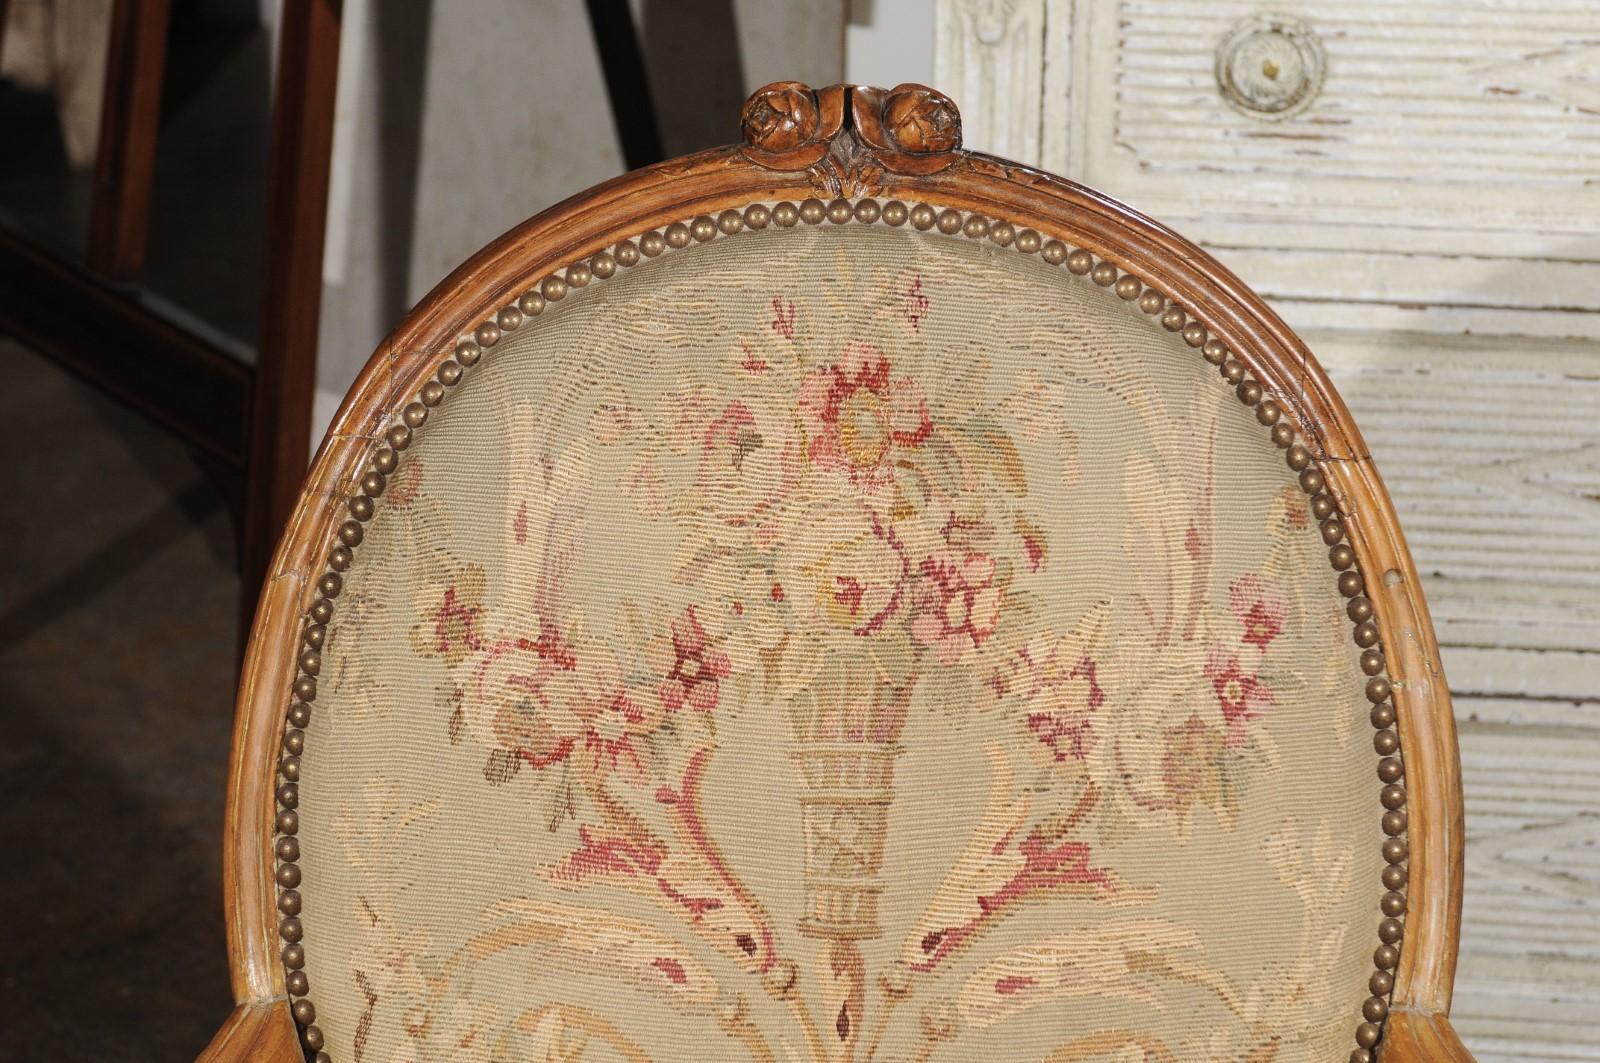 French Louis XVI Period 18th Century Armchair with Floral Tapestry Upholstery For Sale 5